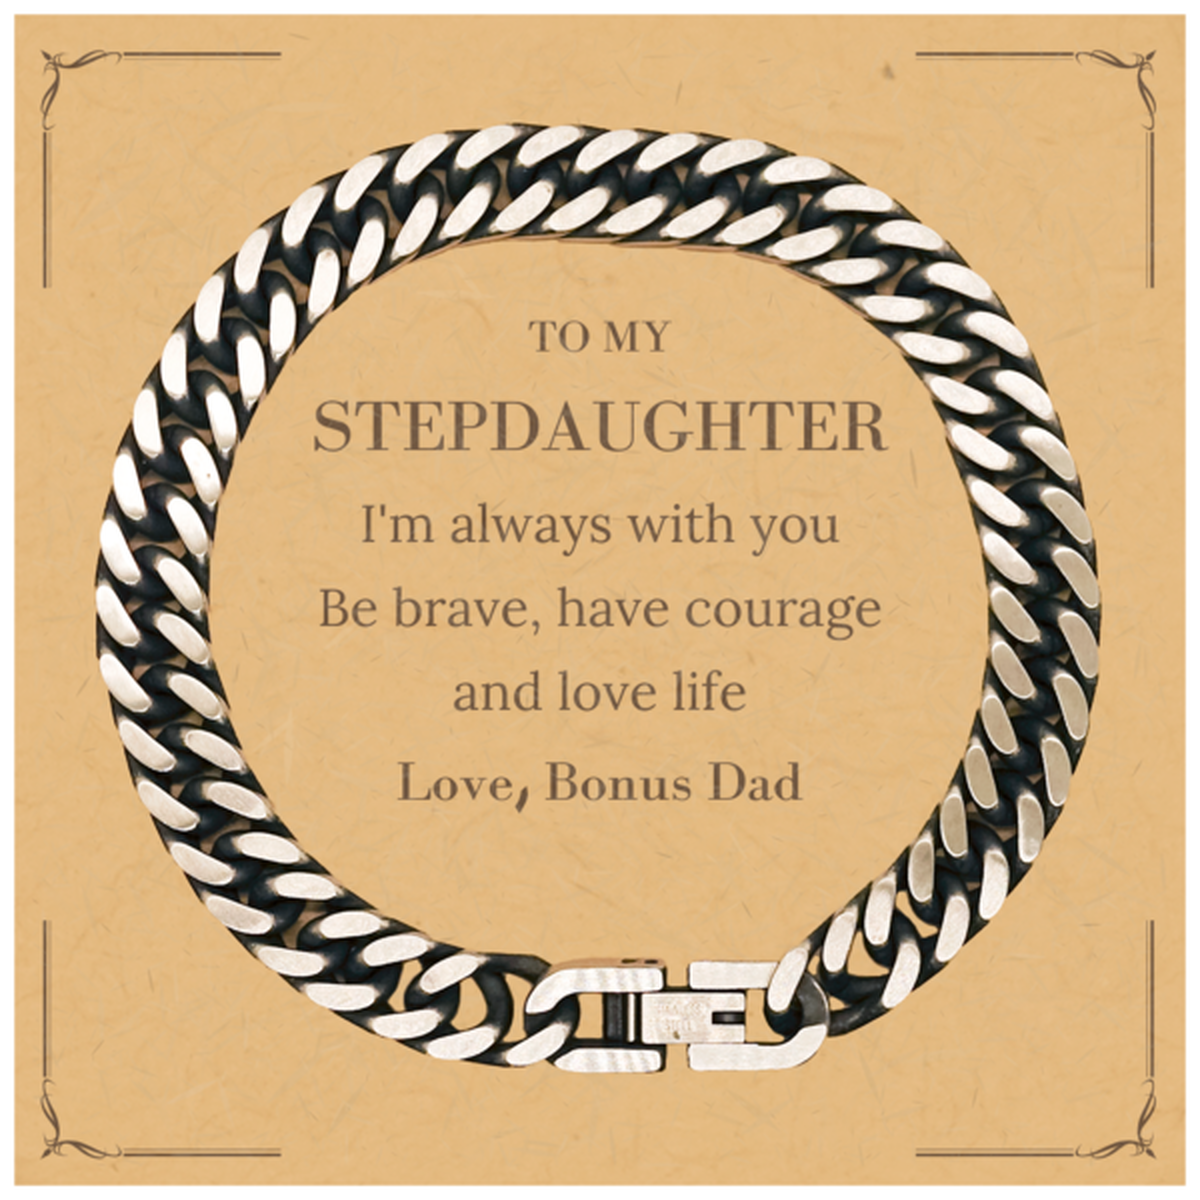 To My Stepdaughter Gifts from Bonus Dad, Unique Cuban Link Chain Bracelet Inspirational Christmas Birthday Graduation Gifts for Stepdaughter I'm always with you. Be brave, have courage and love life. Love, Bonus Dad